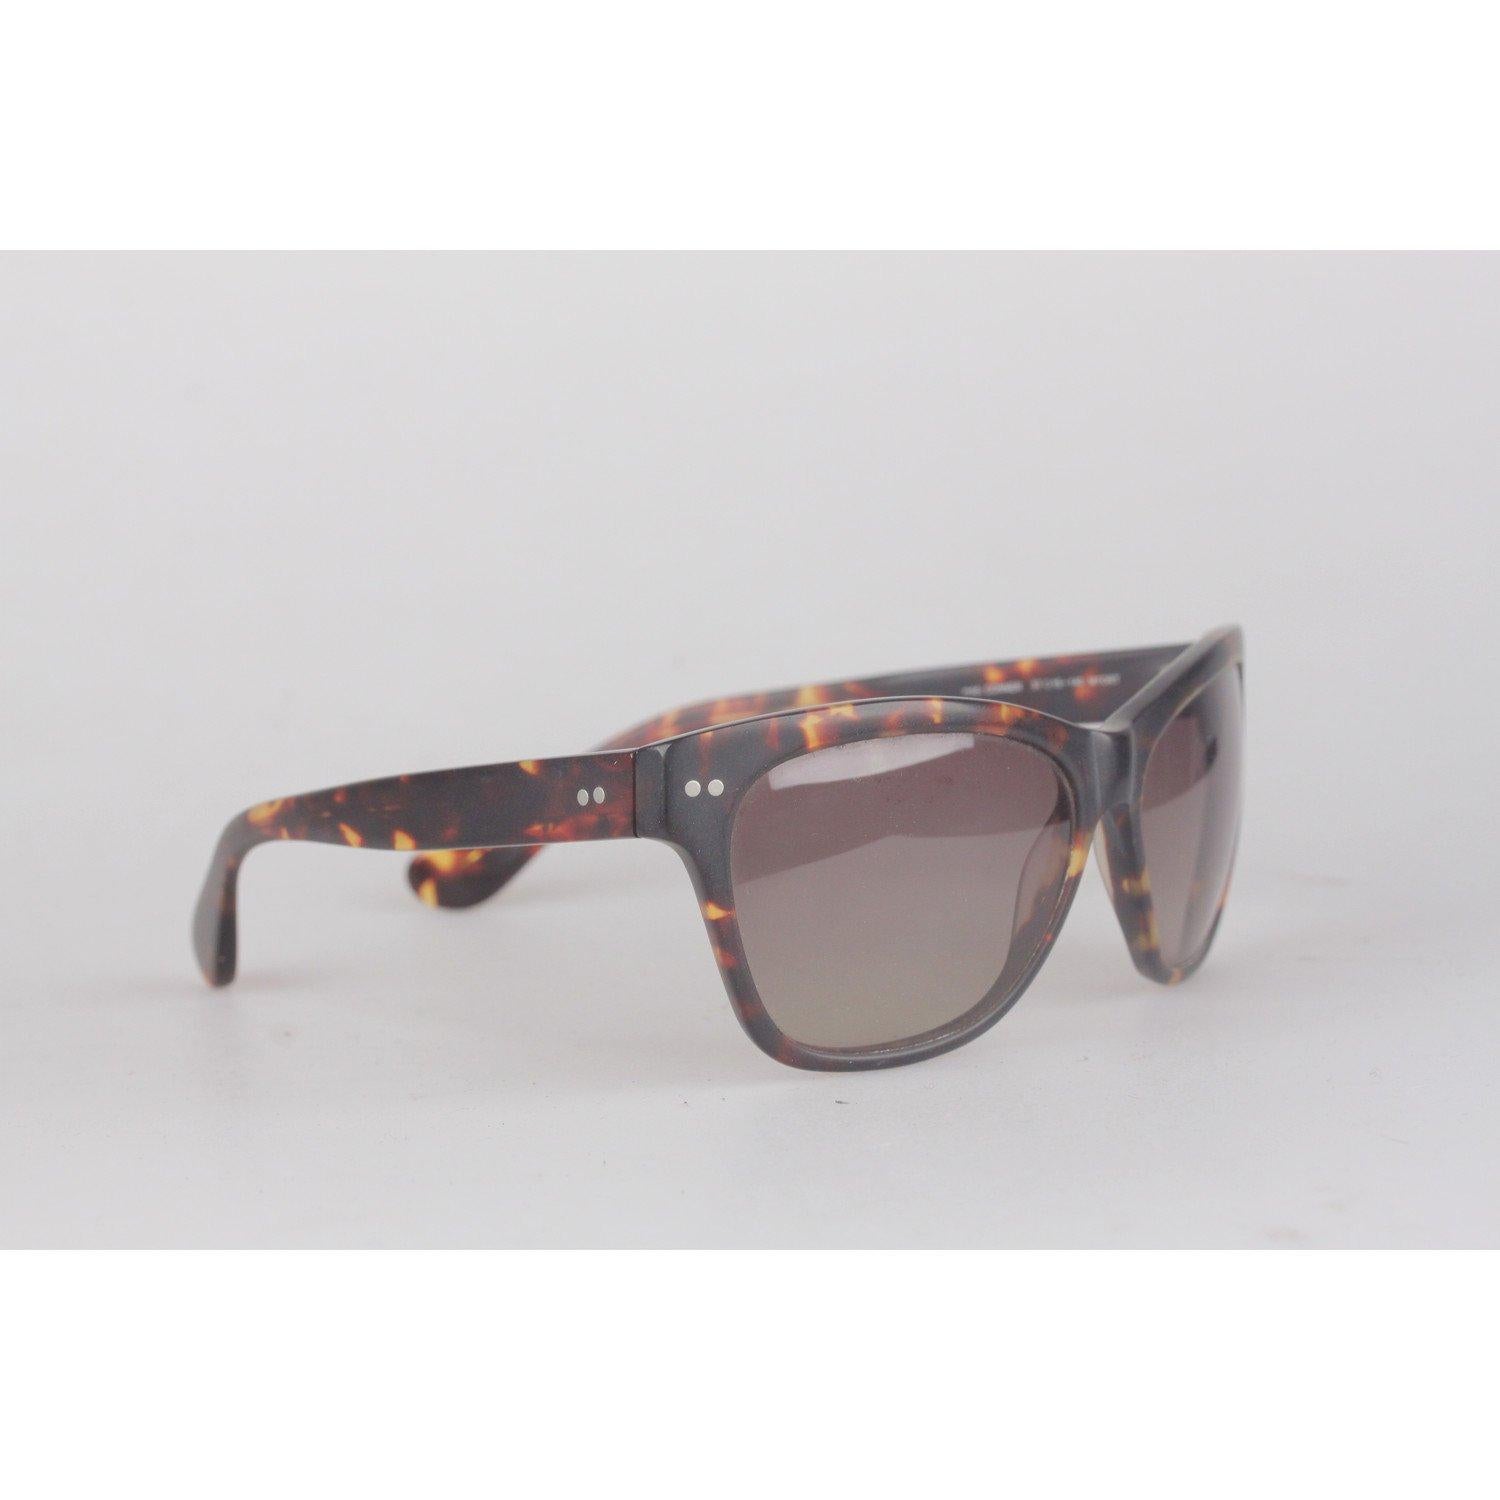 - Brown plastic frame
- Gradient green lenses
- Classic squared frame
- Philip Lim logo on left temple
- Mod. CONNER - 57/15 - 140 - Mtort


Details

MATERIAL: Acetate

COLOR: Brown

MODEL: Conner

GENDER: Unisex Adults

COUNTRY OF MANUFACTURE: